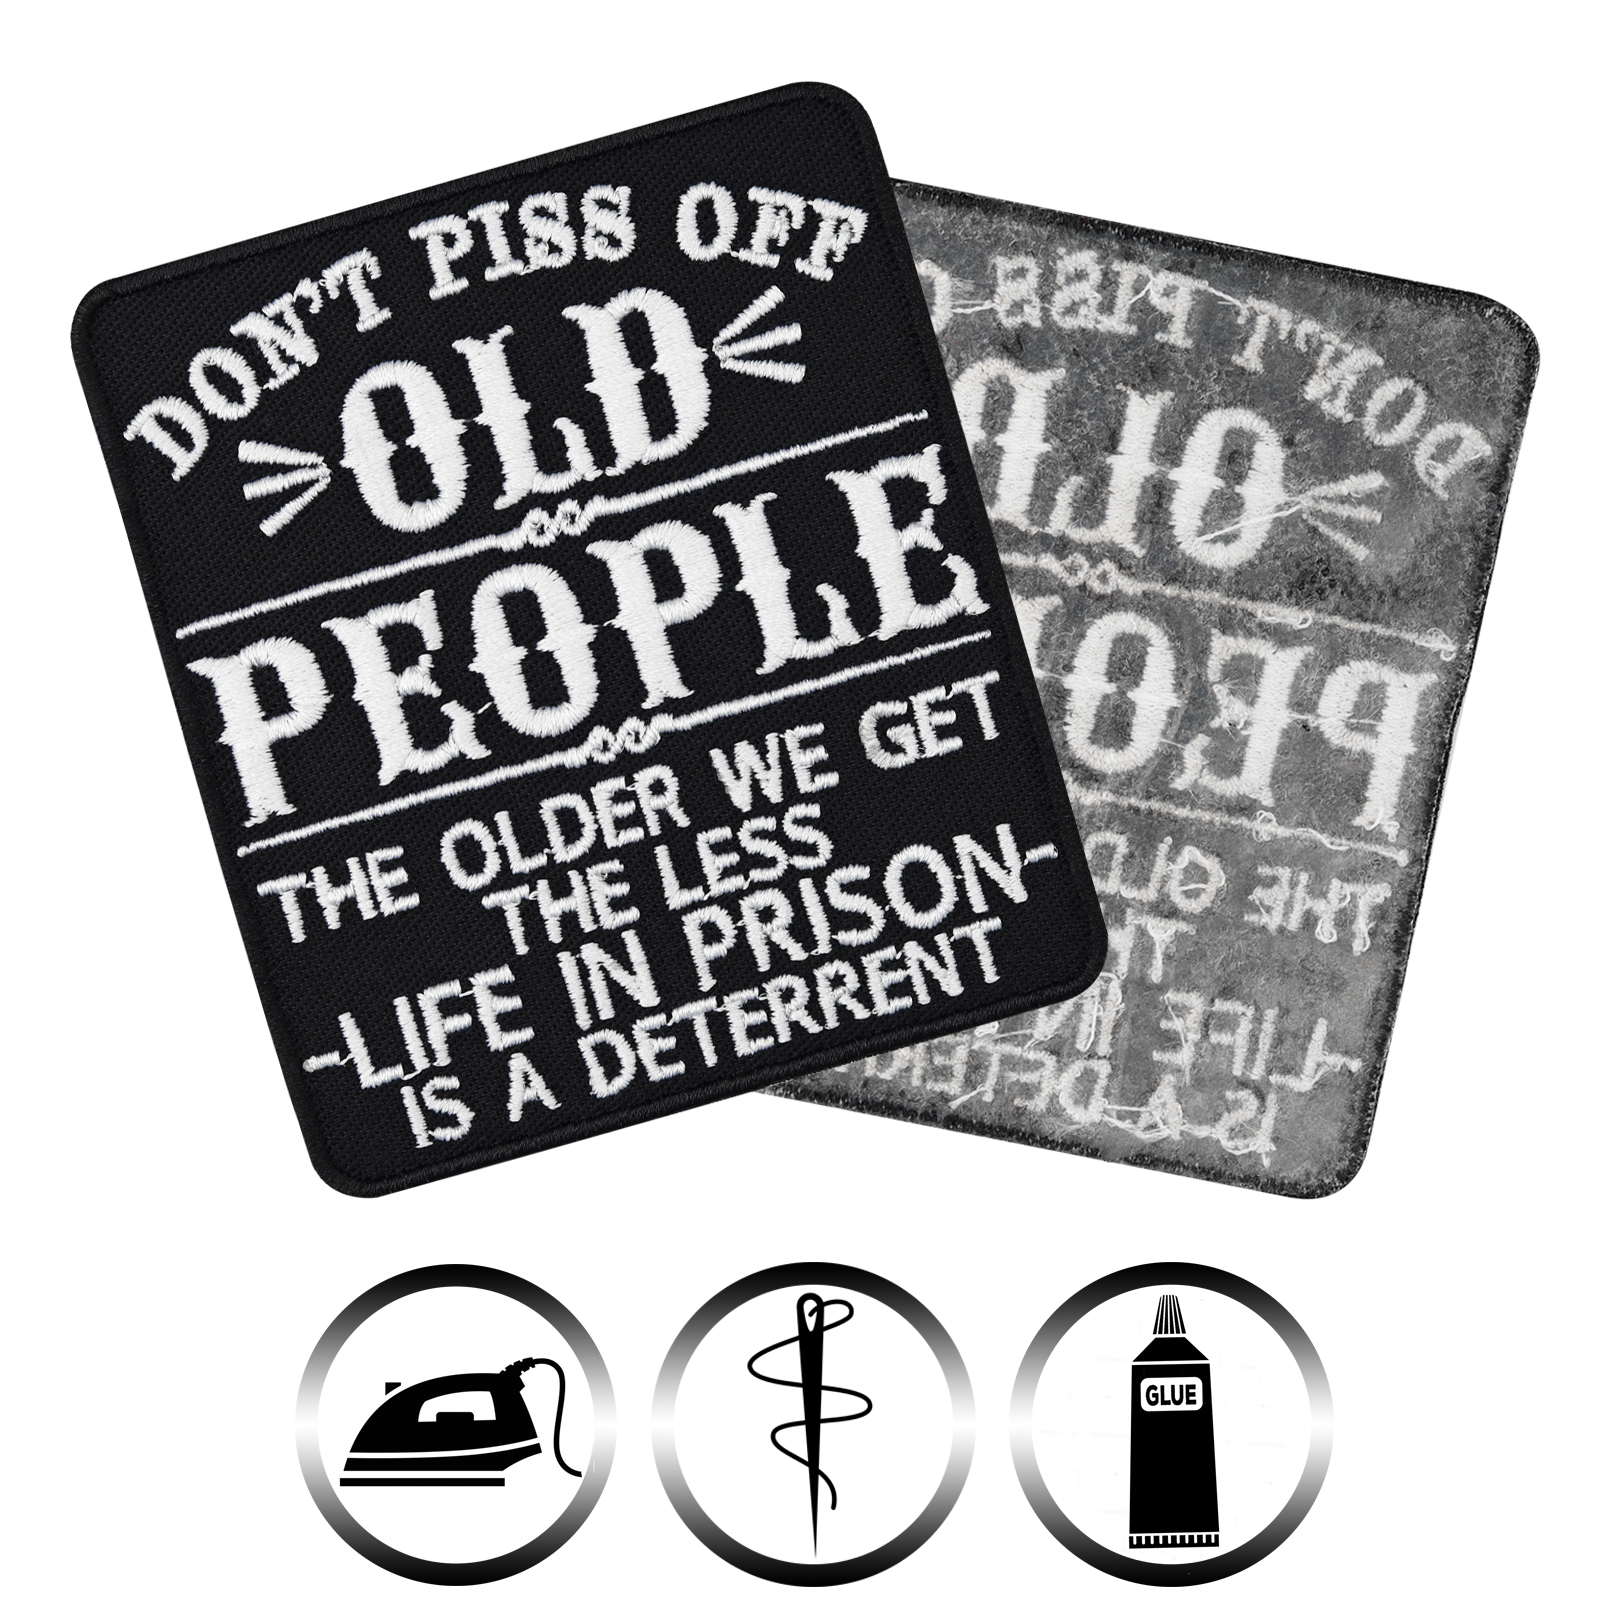 Don't piss off old people! - Patch